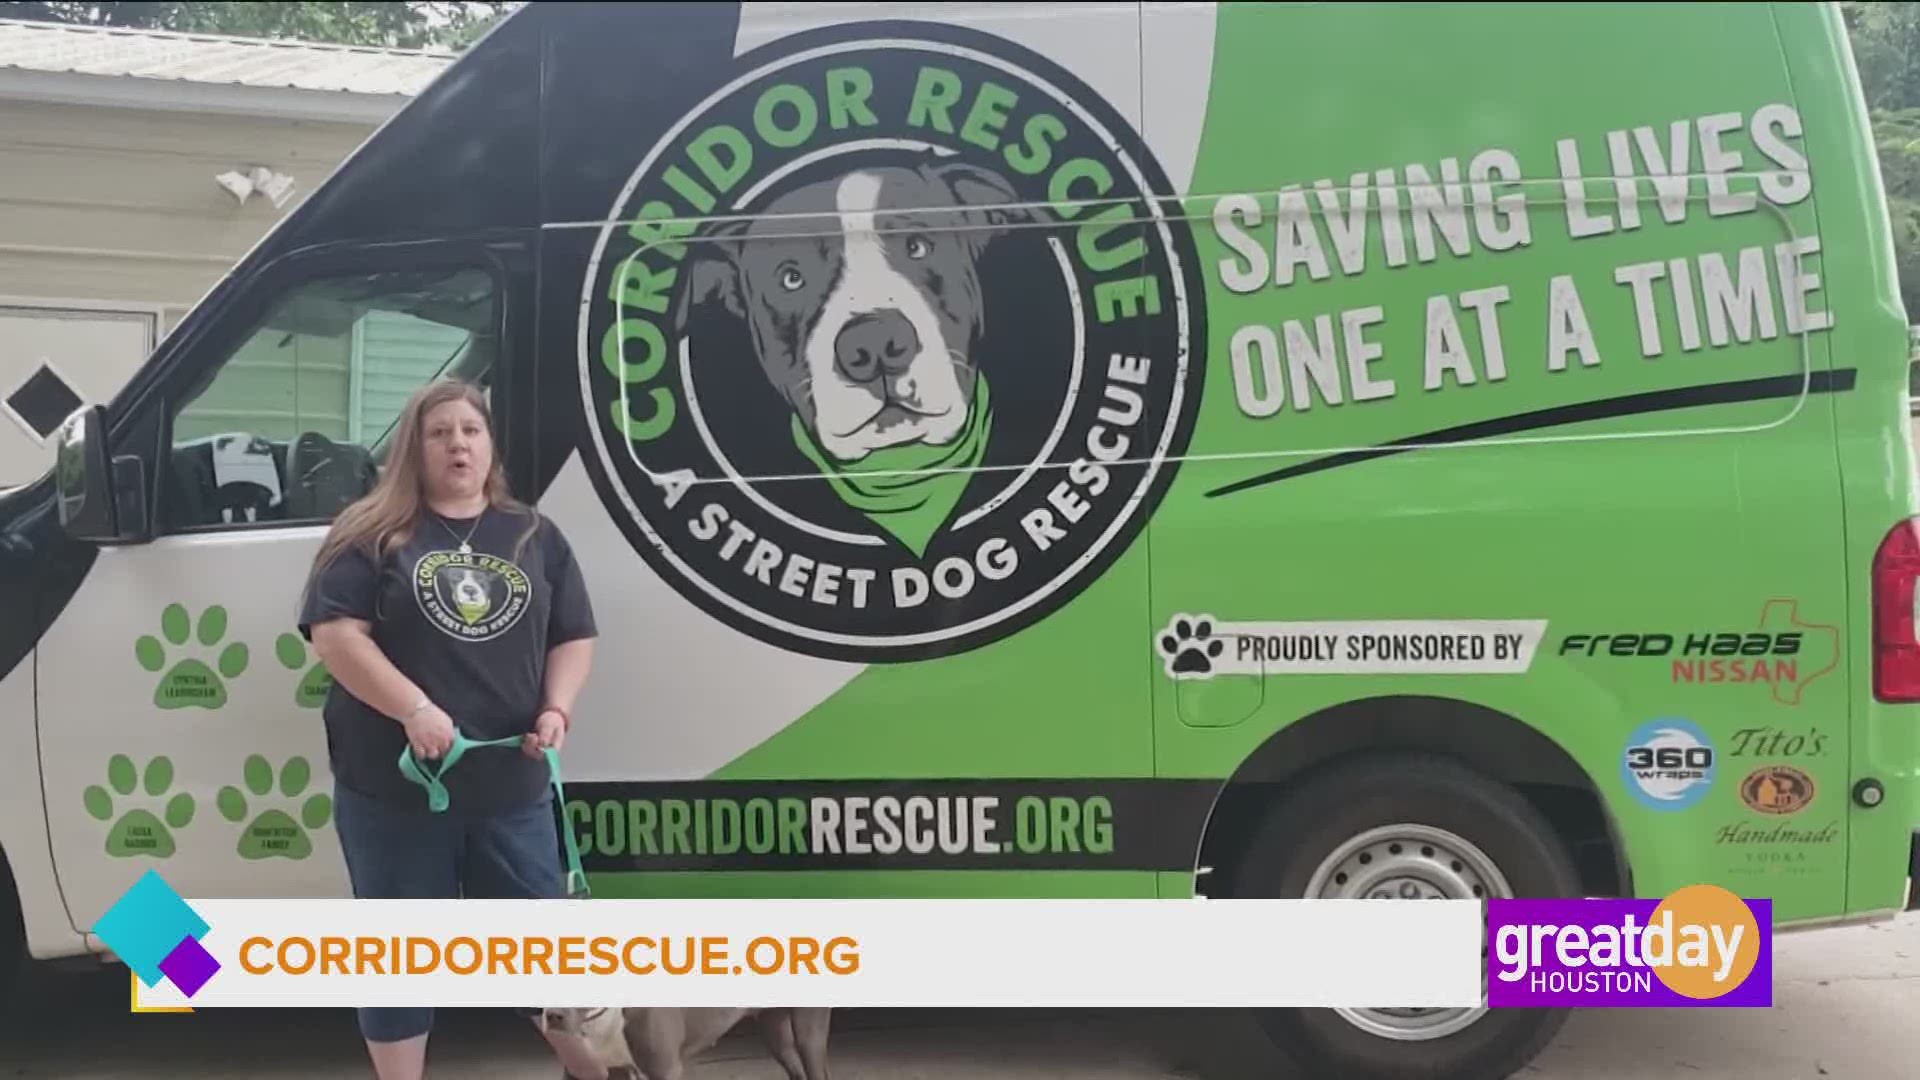 Beth Lovell, Board Chair of Corridor Rescue is rescuing and finding forever homes for abandoned and injured dogs.